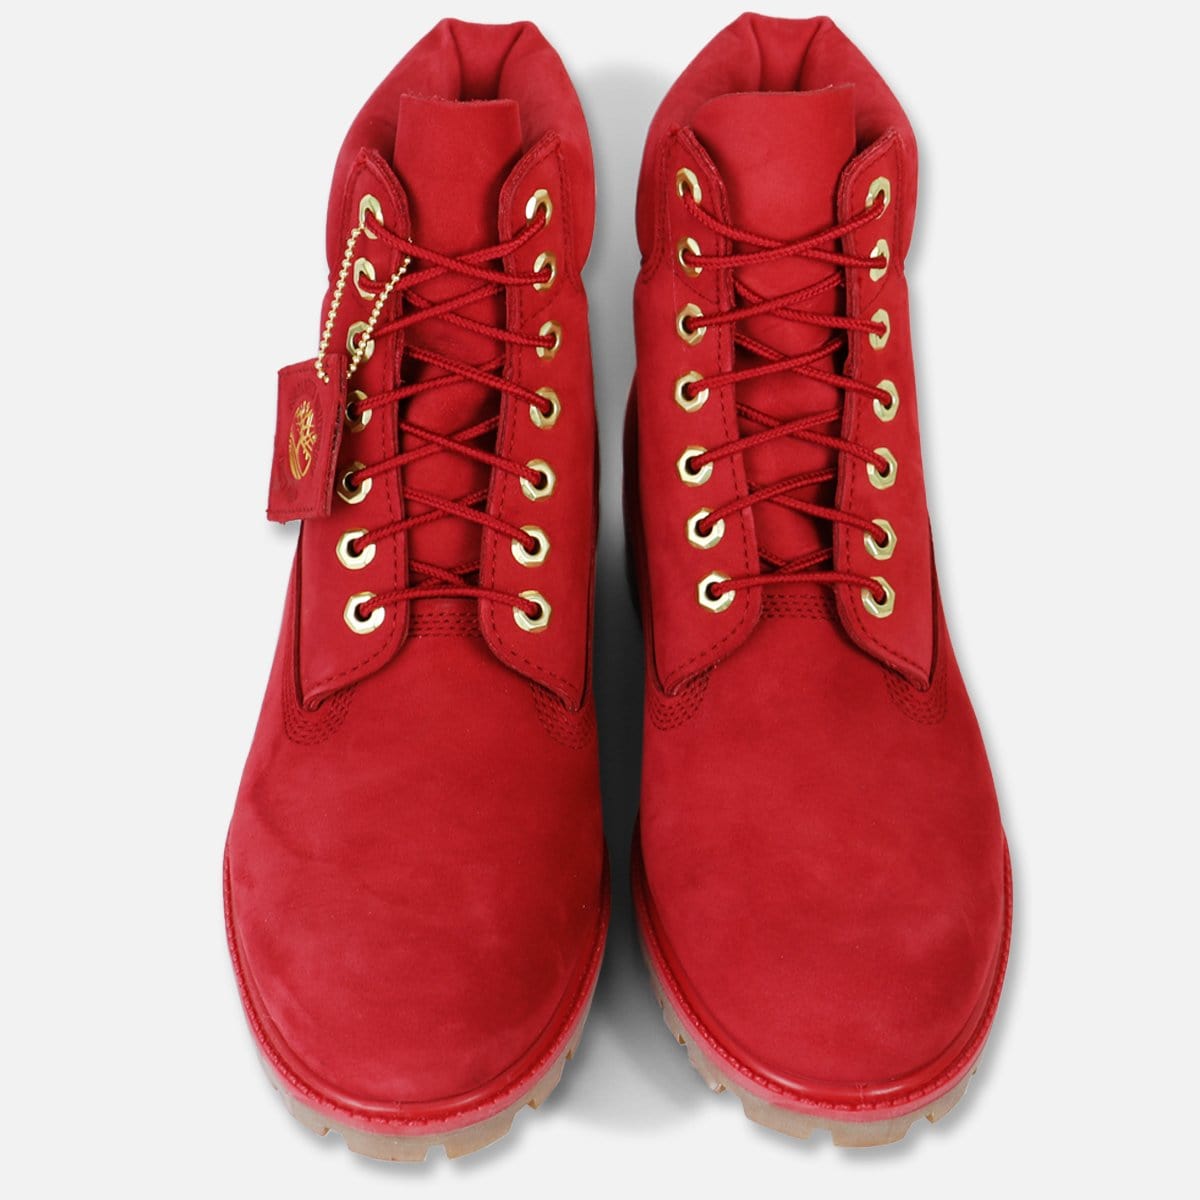 Timberland 6" Premium Boot 'Fire' (Red/Red)